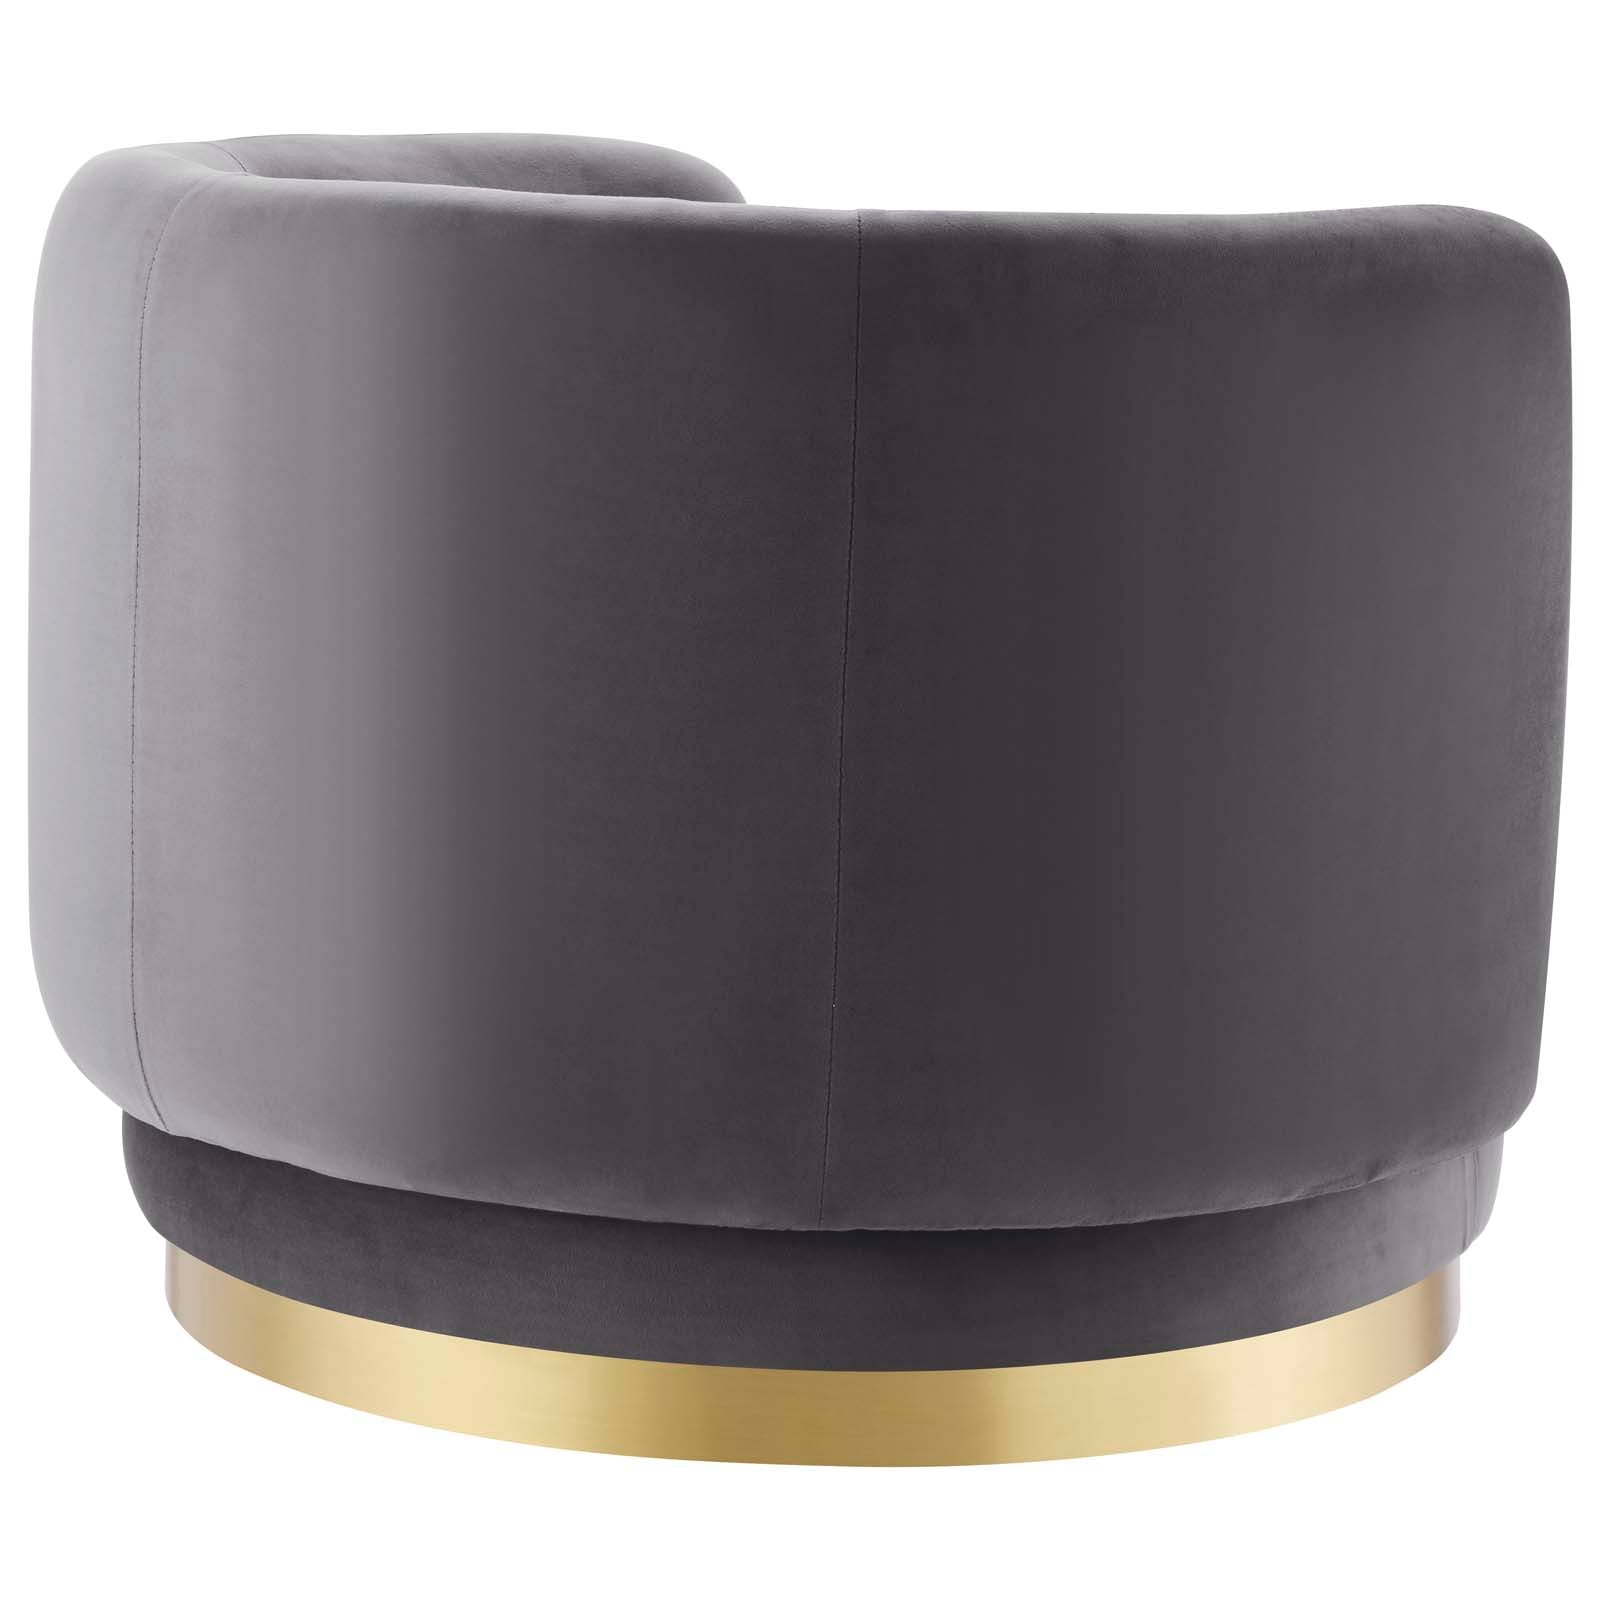 Modway Accent Chairs - Relish Performance Velvet Performance Velvet Swivel Chair Gold Gray